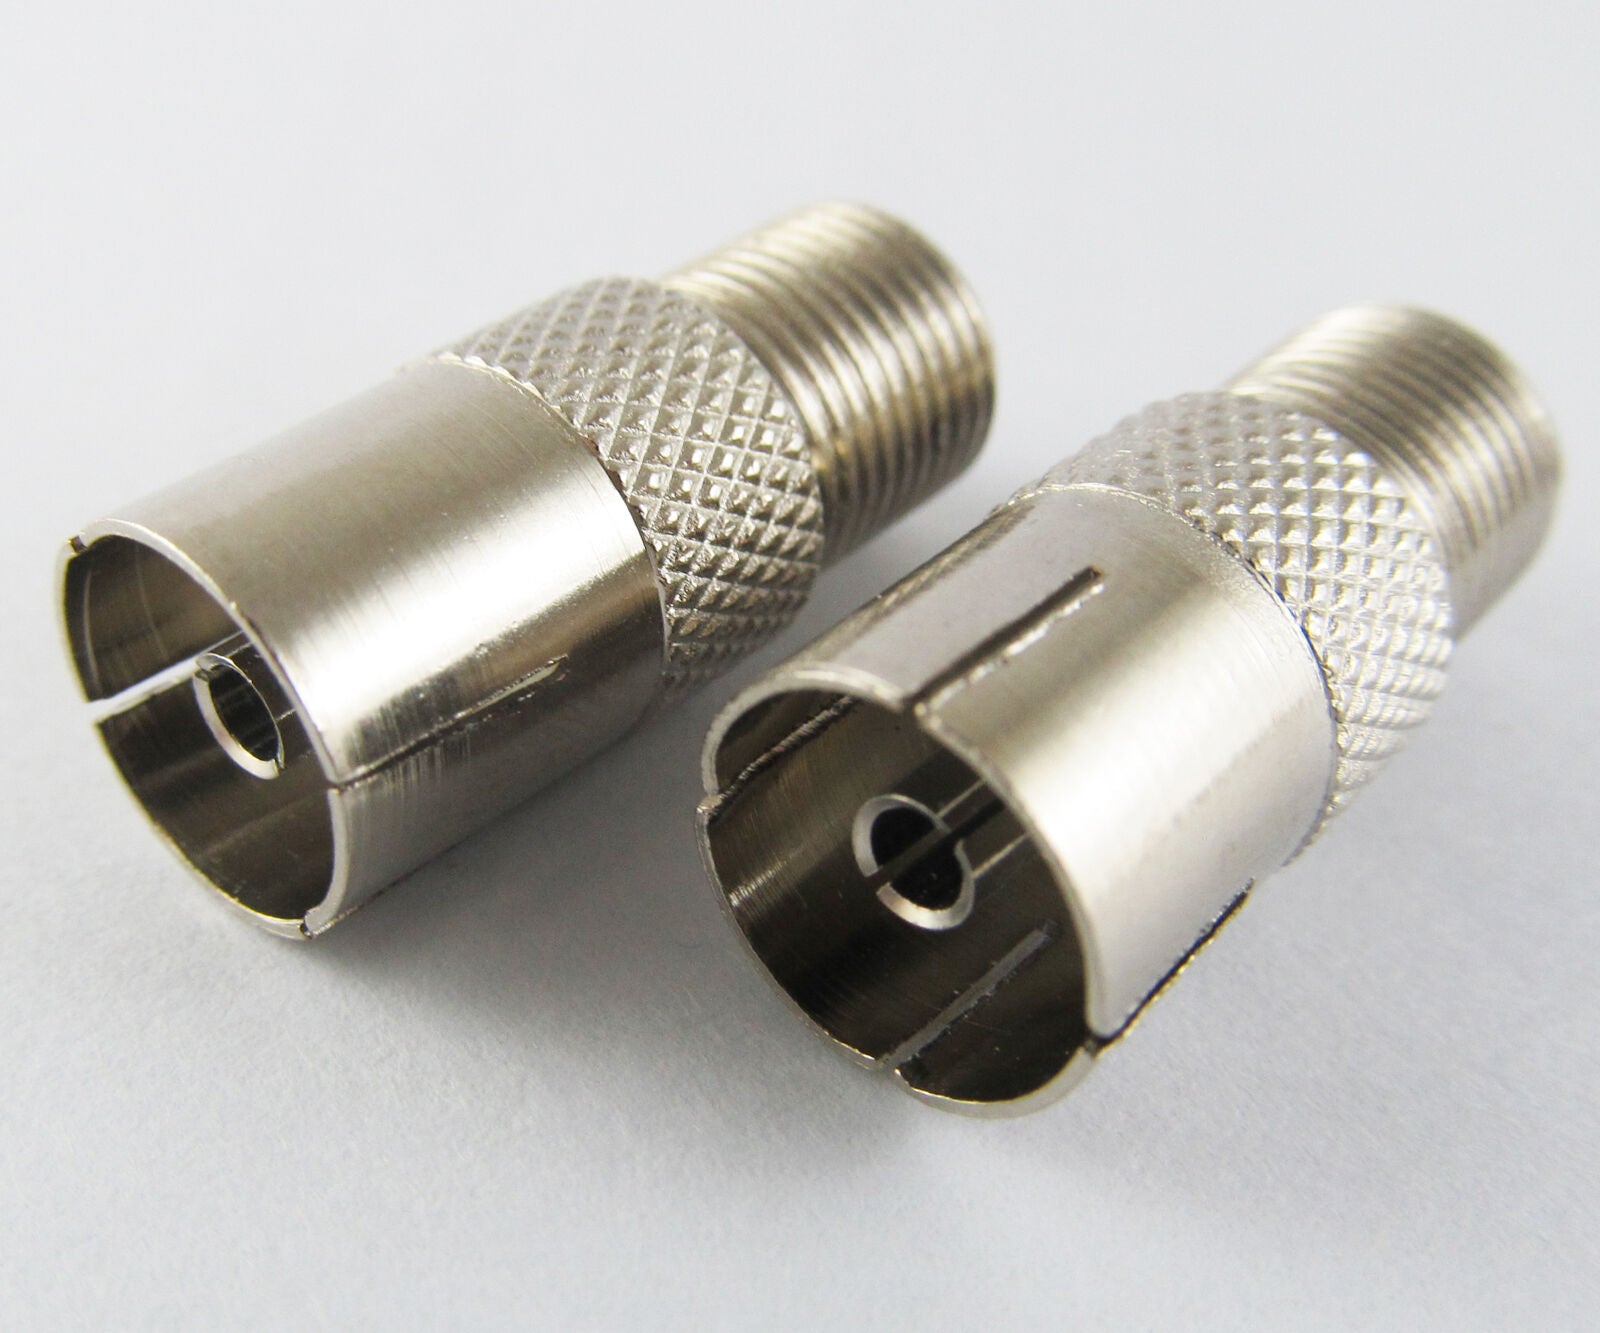 2pcs Nickel F Female Jack to TV PAL Female Jack Coaxial Connector Adapter Metal